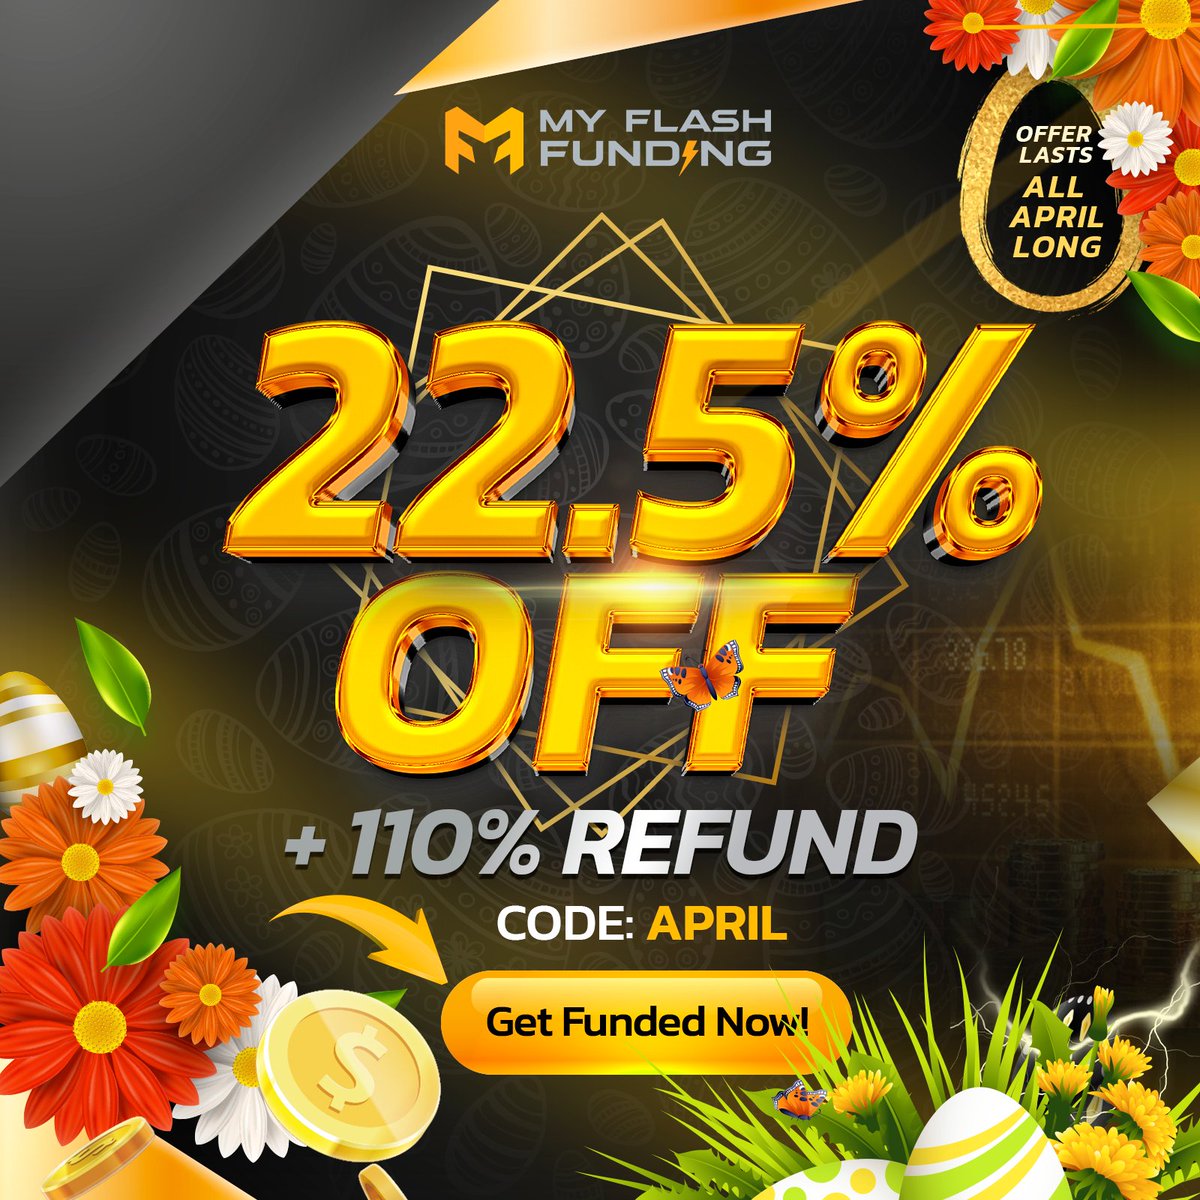 Get 22.5% OFF + 110% REFUND on ALL ACCOUNTS! ⚡️ Use Code: APRIL Don't miss this opportunity to get funded now! 👉 myflashfunding.com